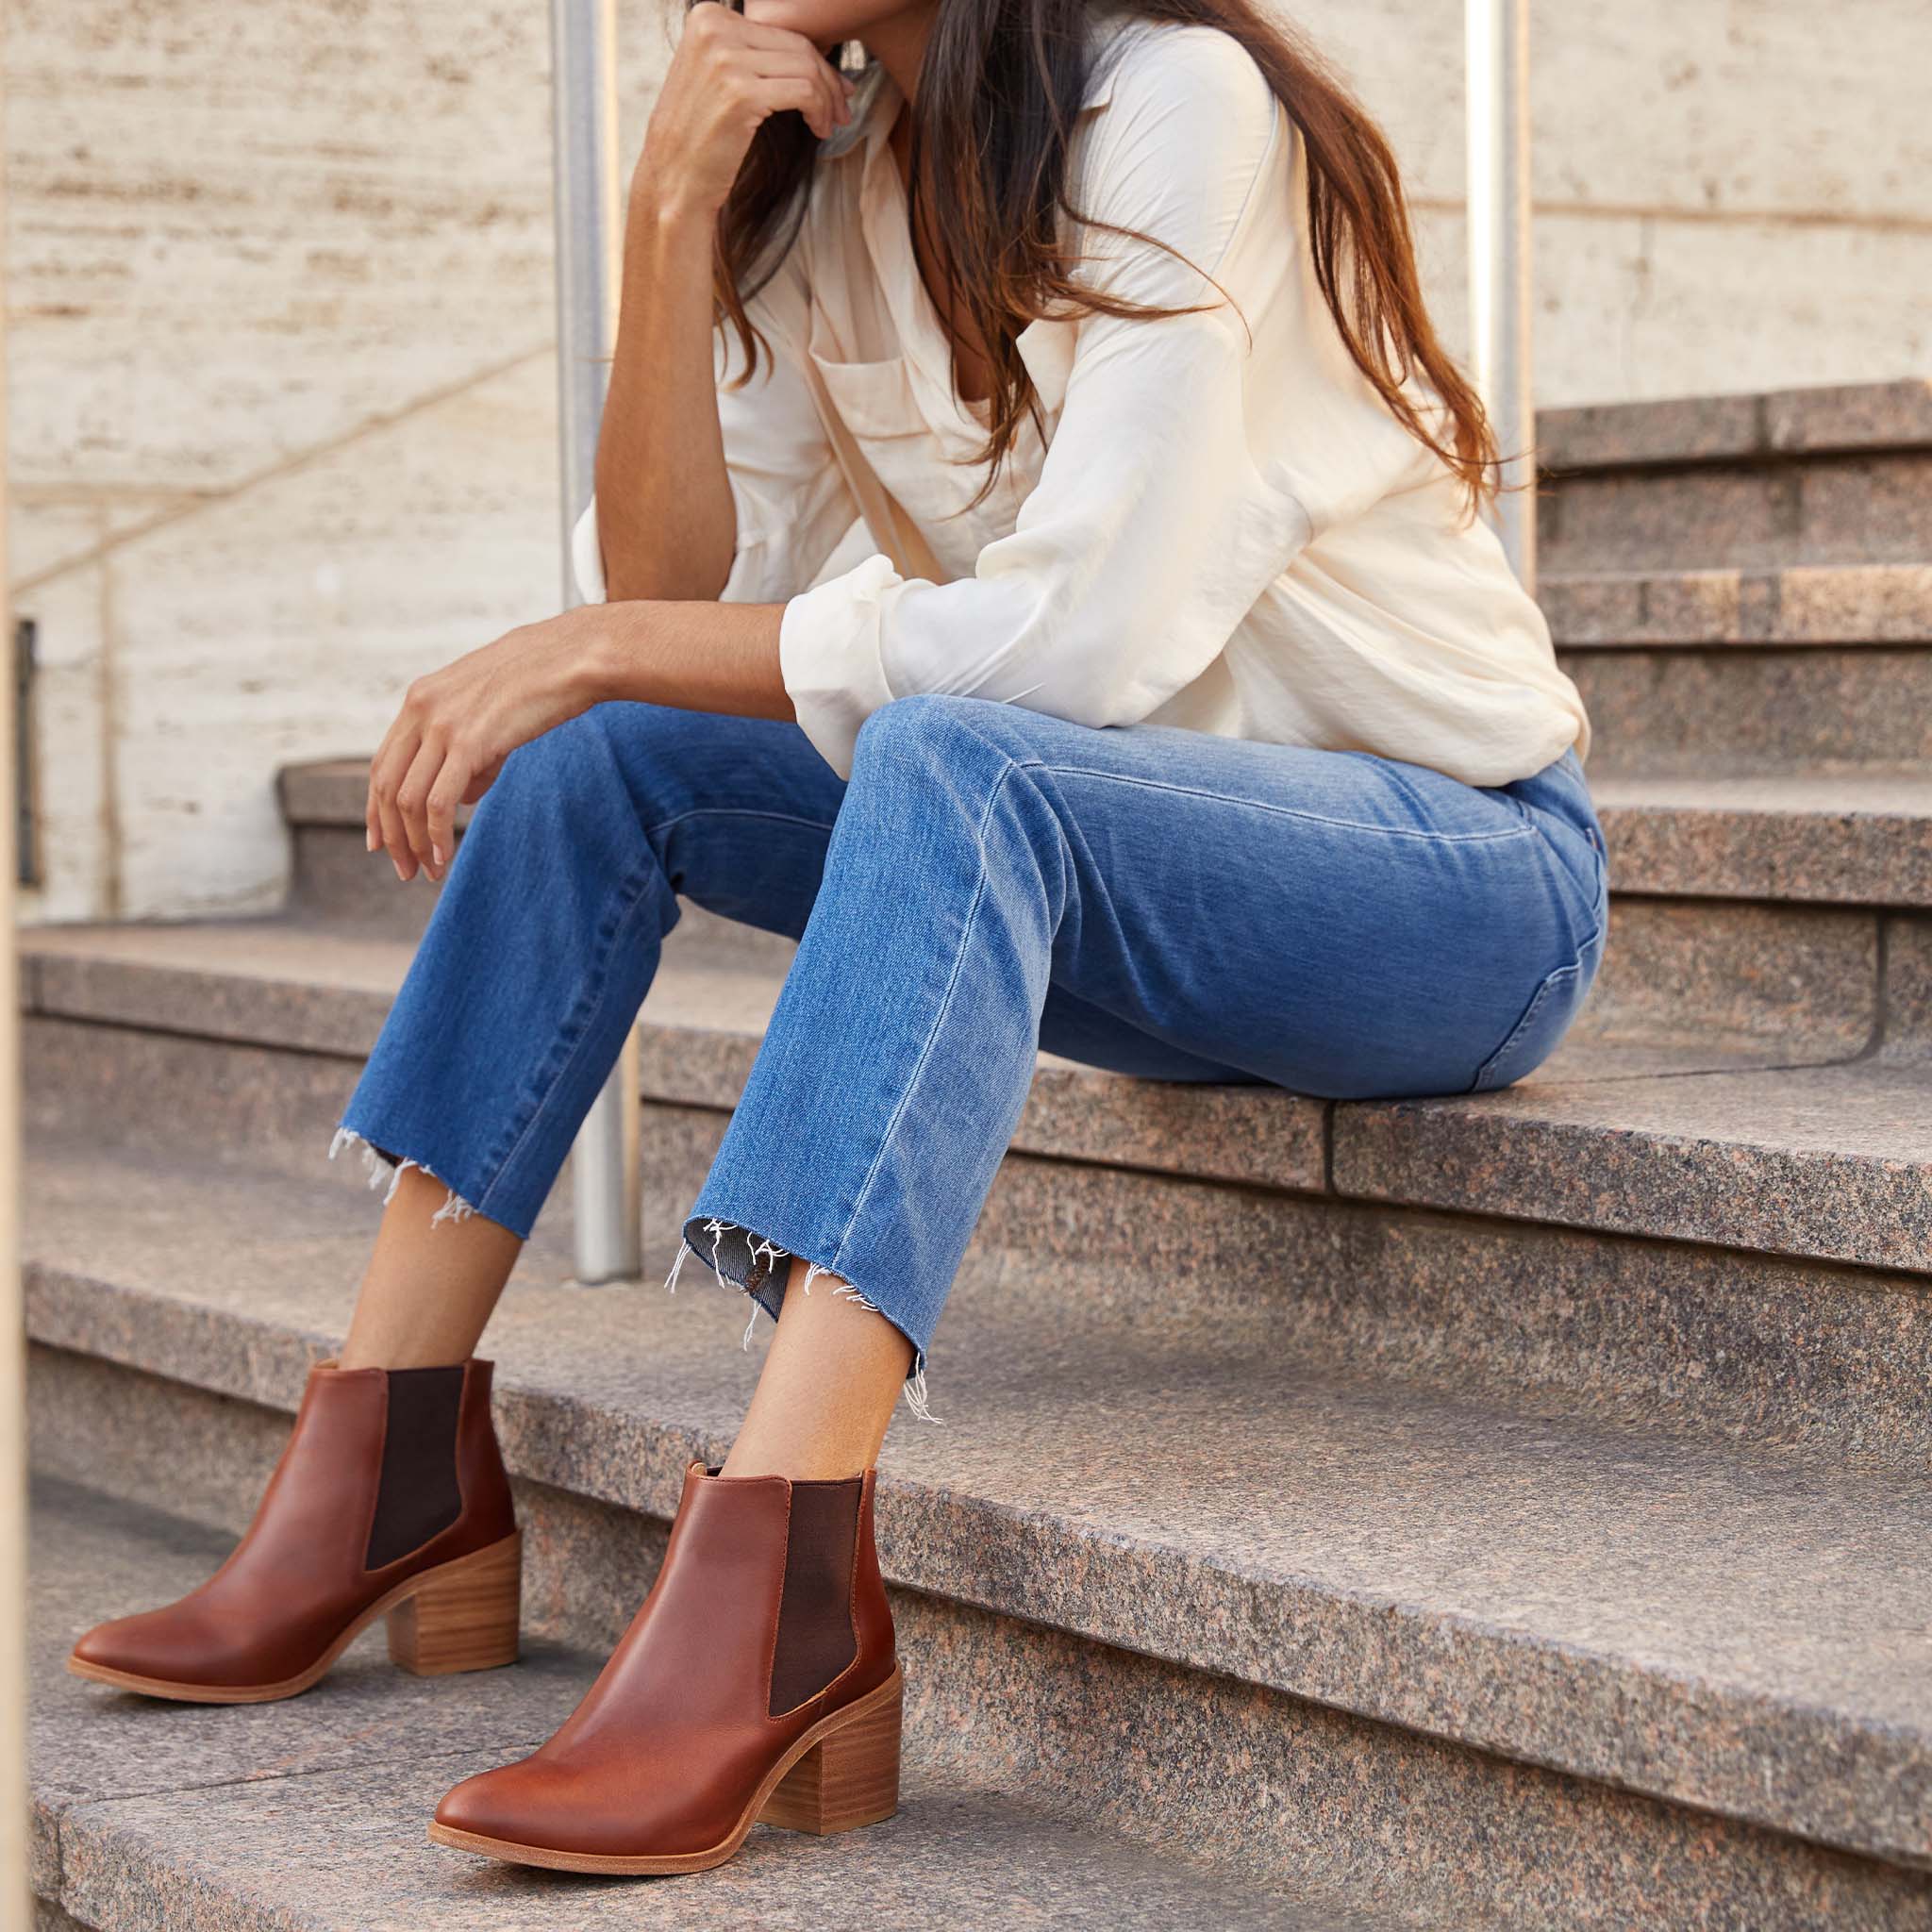 Image 3 of the Heeled Chelsea Boot Brandy on model